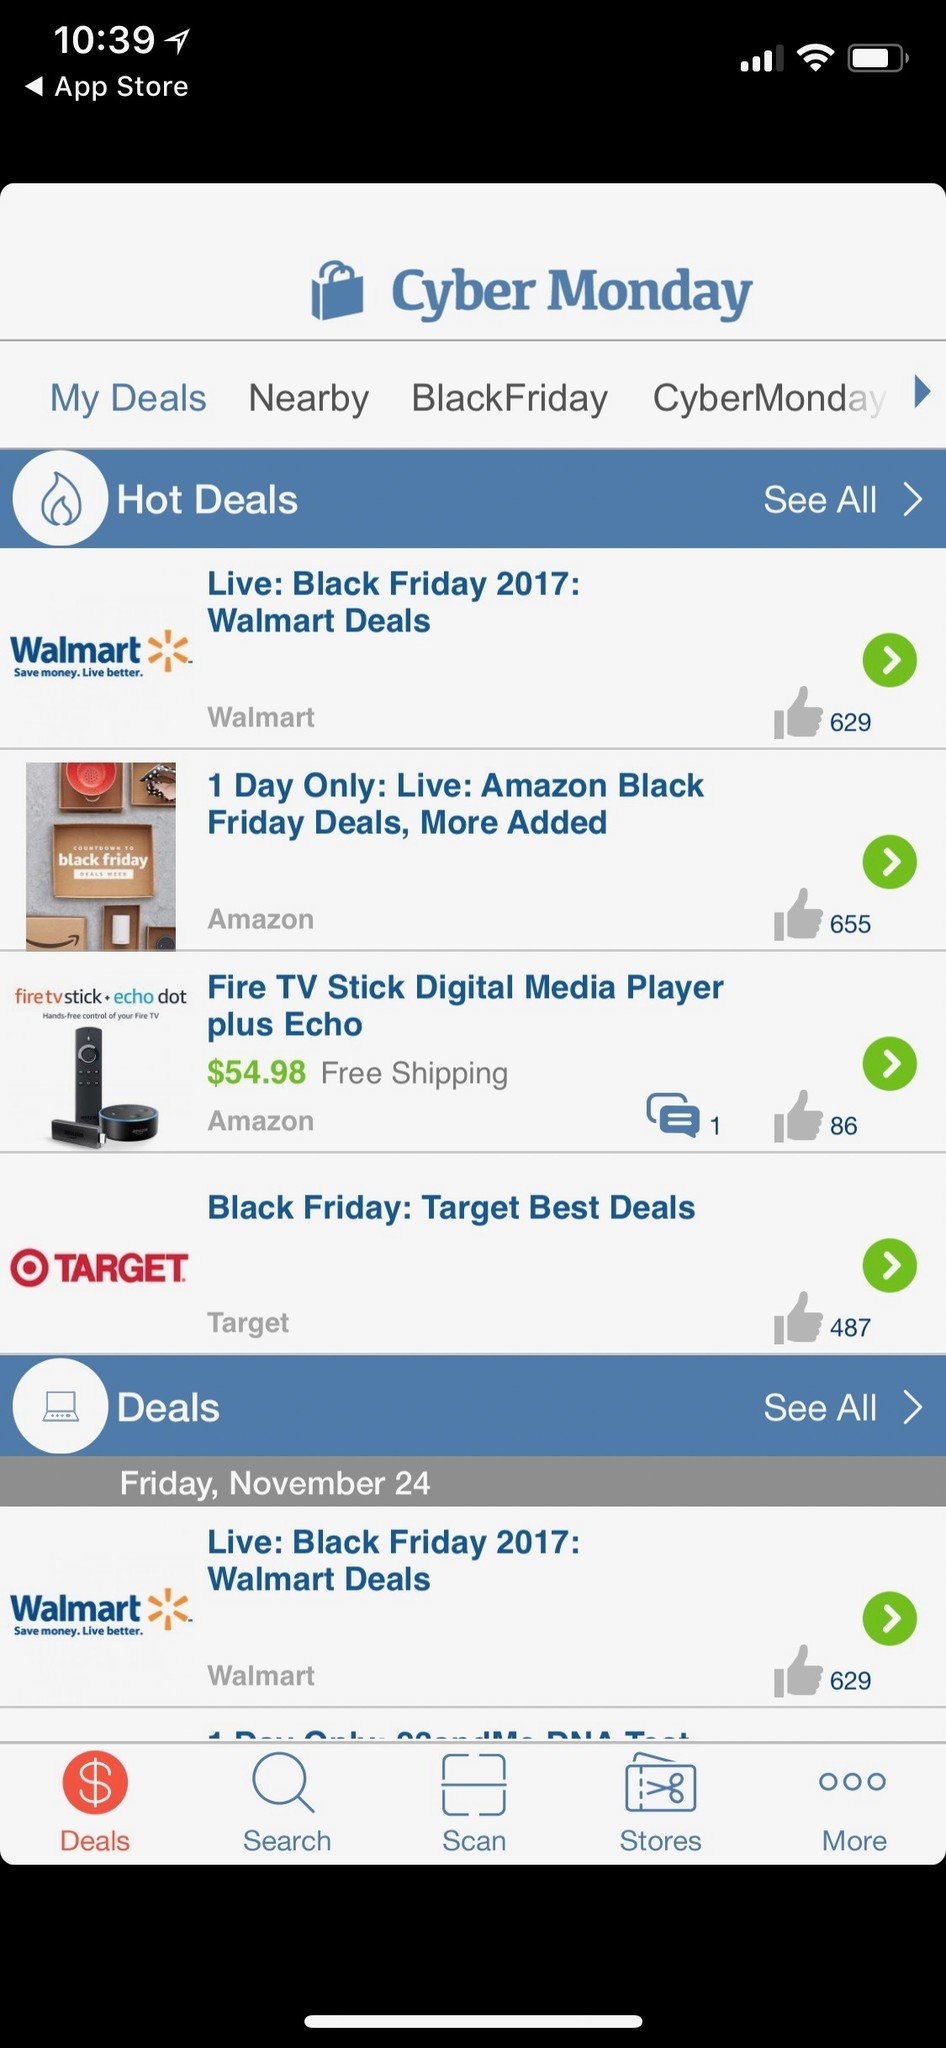 Cyber Monday 2017 Deals and Ads